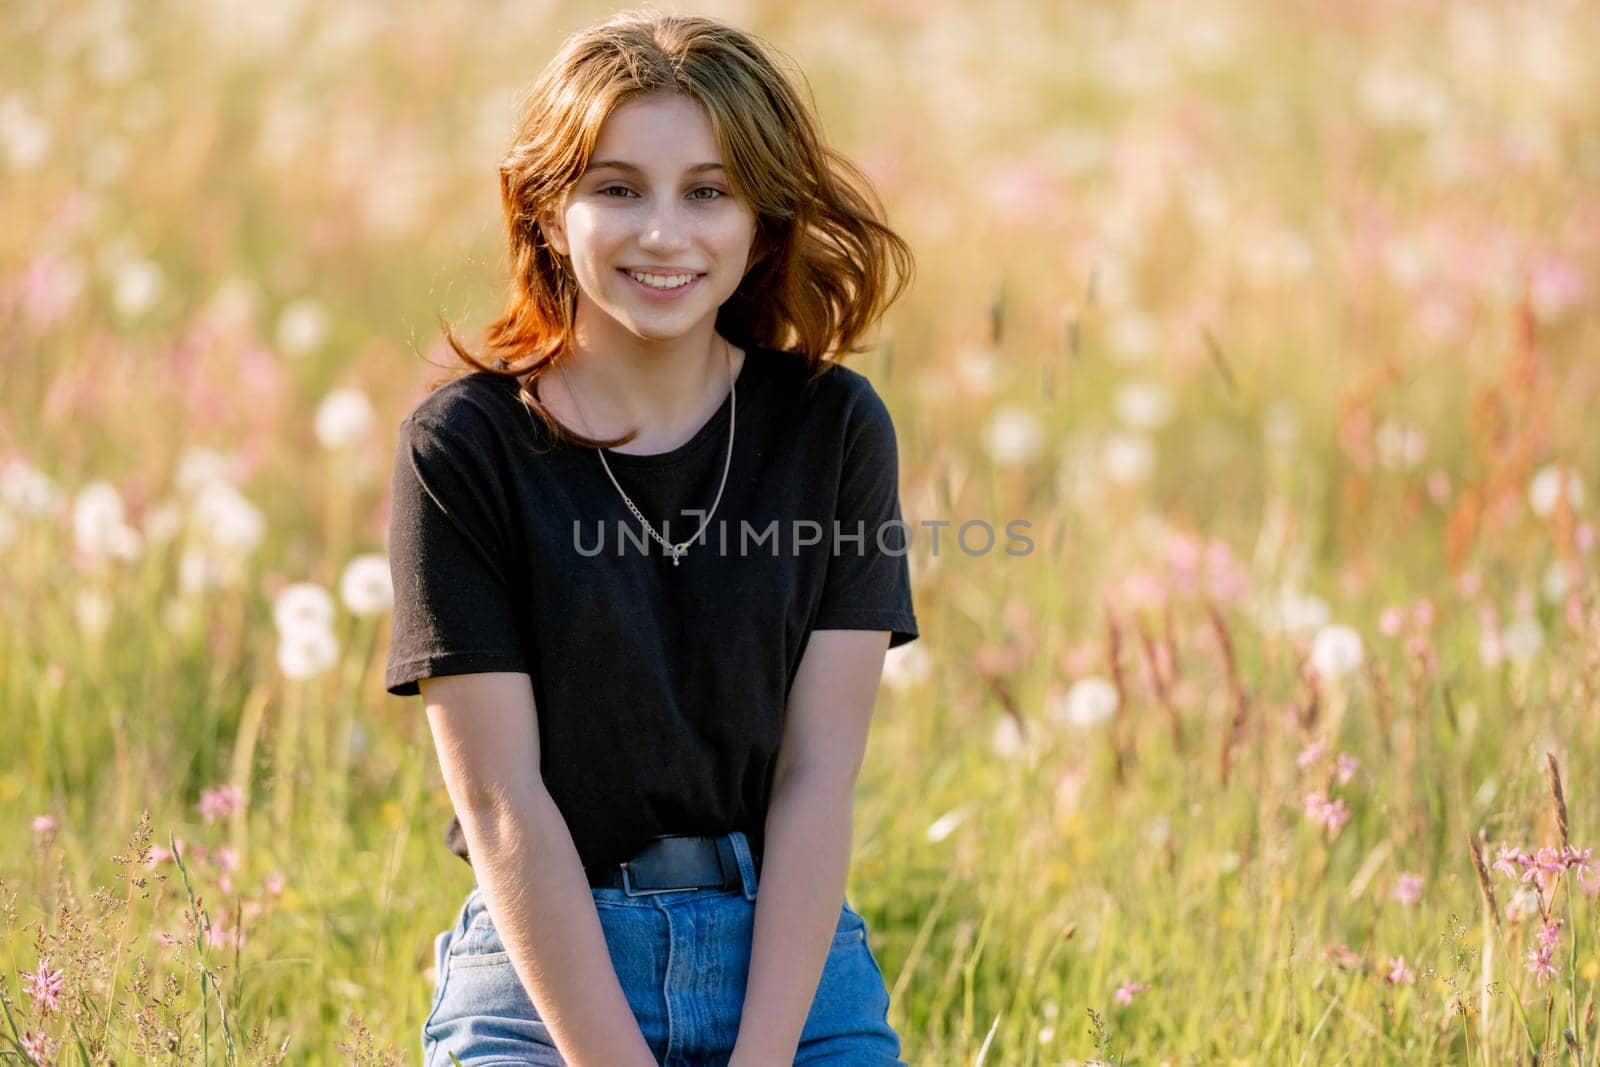 Pretty girl teenager sitting in field with dandelions and smiling outdoors. Beautiful young female person at nature in sunny day portrait